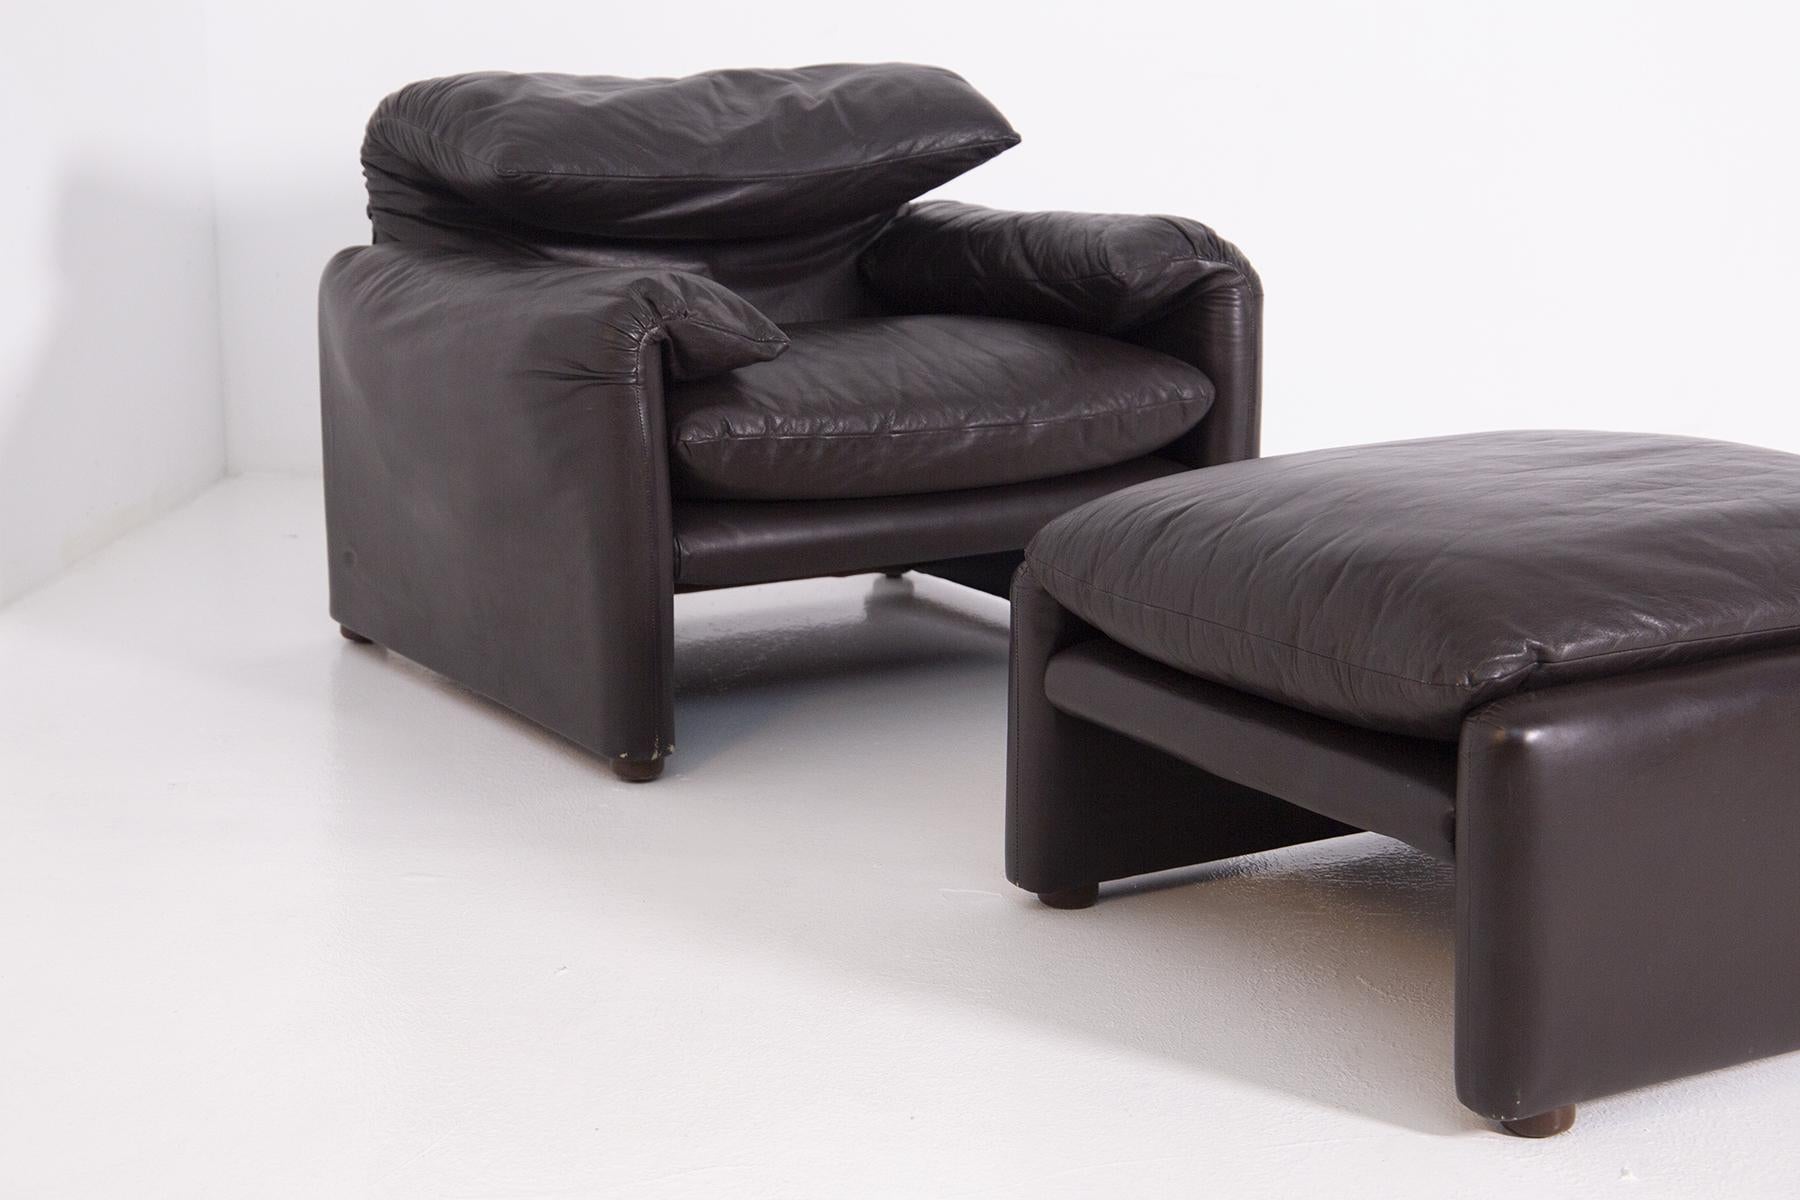 Armchair designed by Vico Magistretti for the Cassina and Busnelli factory in the 1970s. The armchair is complete with its ottoman covered entirely in dark brown leather. The armchair is the first edition of the famous Maralunga, known for its